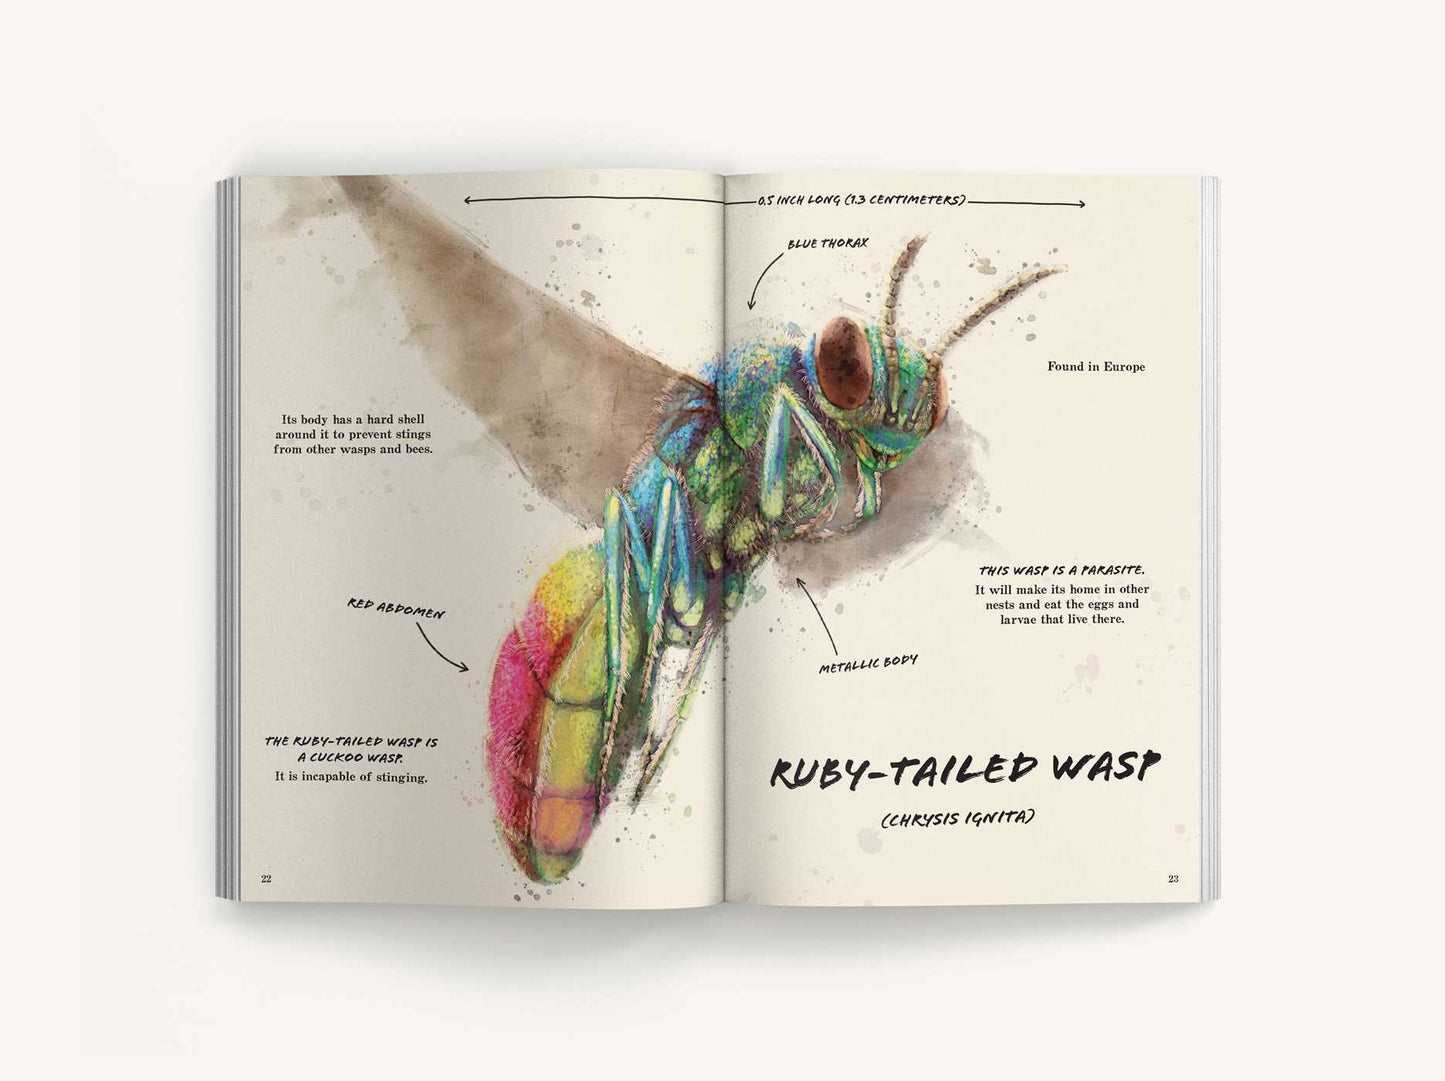 The Ultimate Bug Field Guide: The Entomologist's Handbook